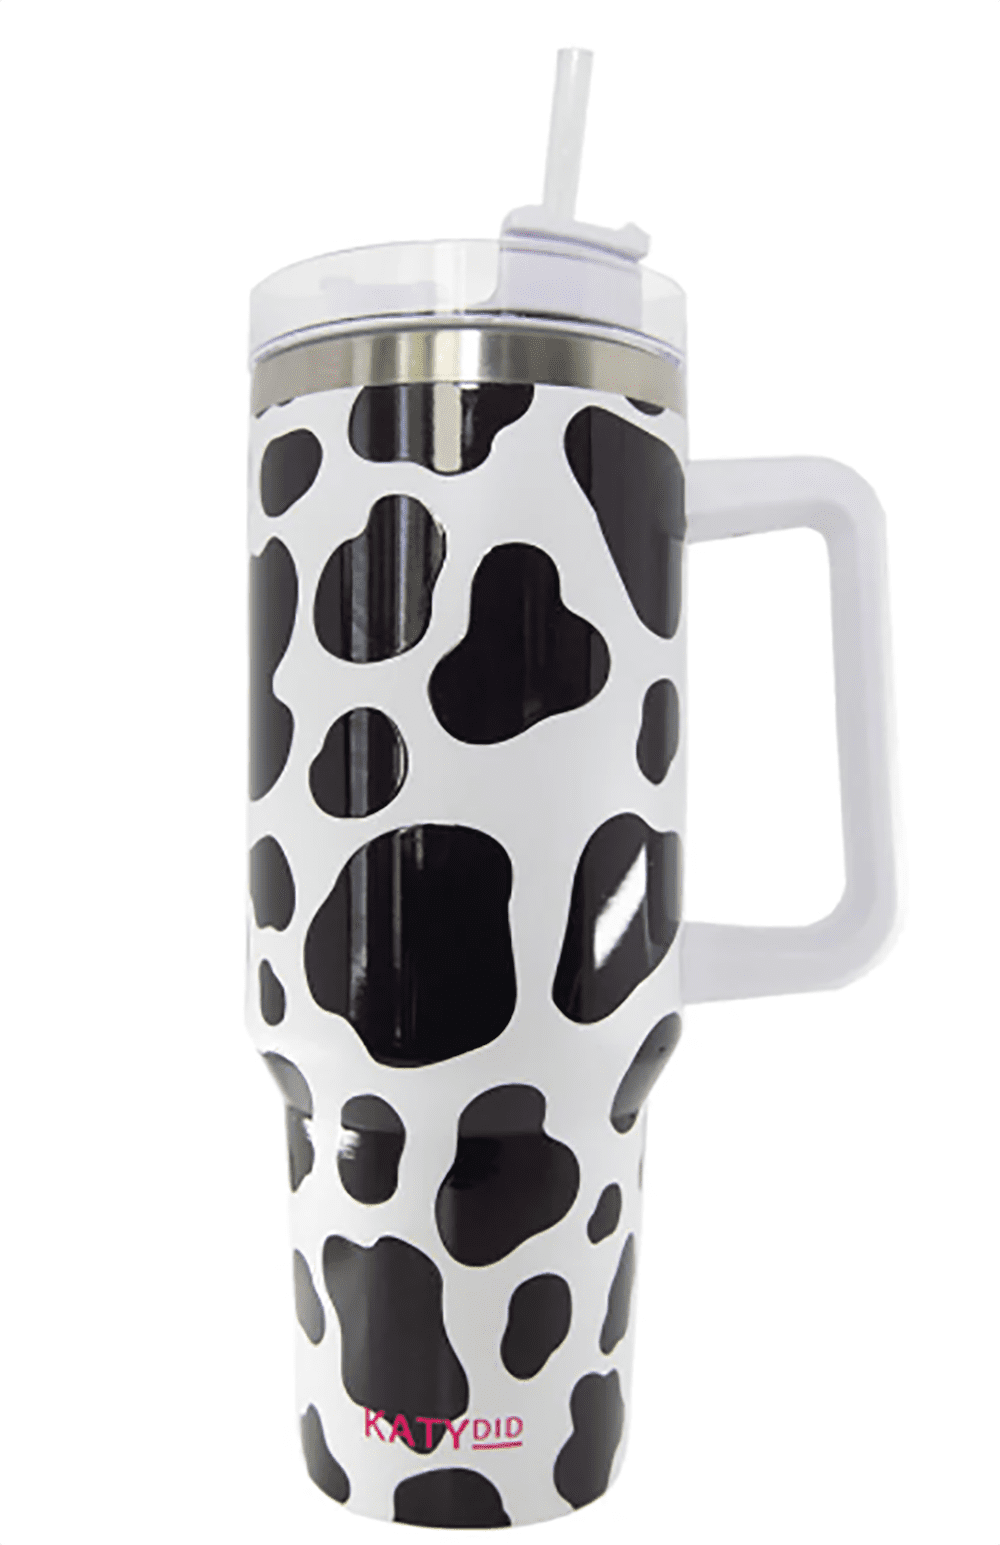 Katydid Stainless Steel Large Capacity 40 oz. Vacuum Insulated Cup Printed  Tumbler With Handle, Navy Daisy 